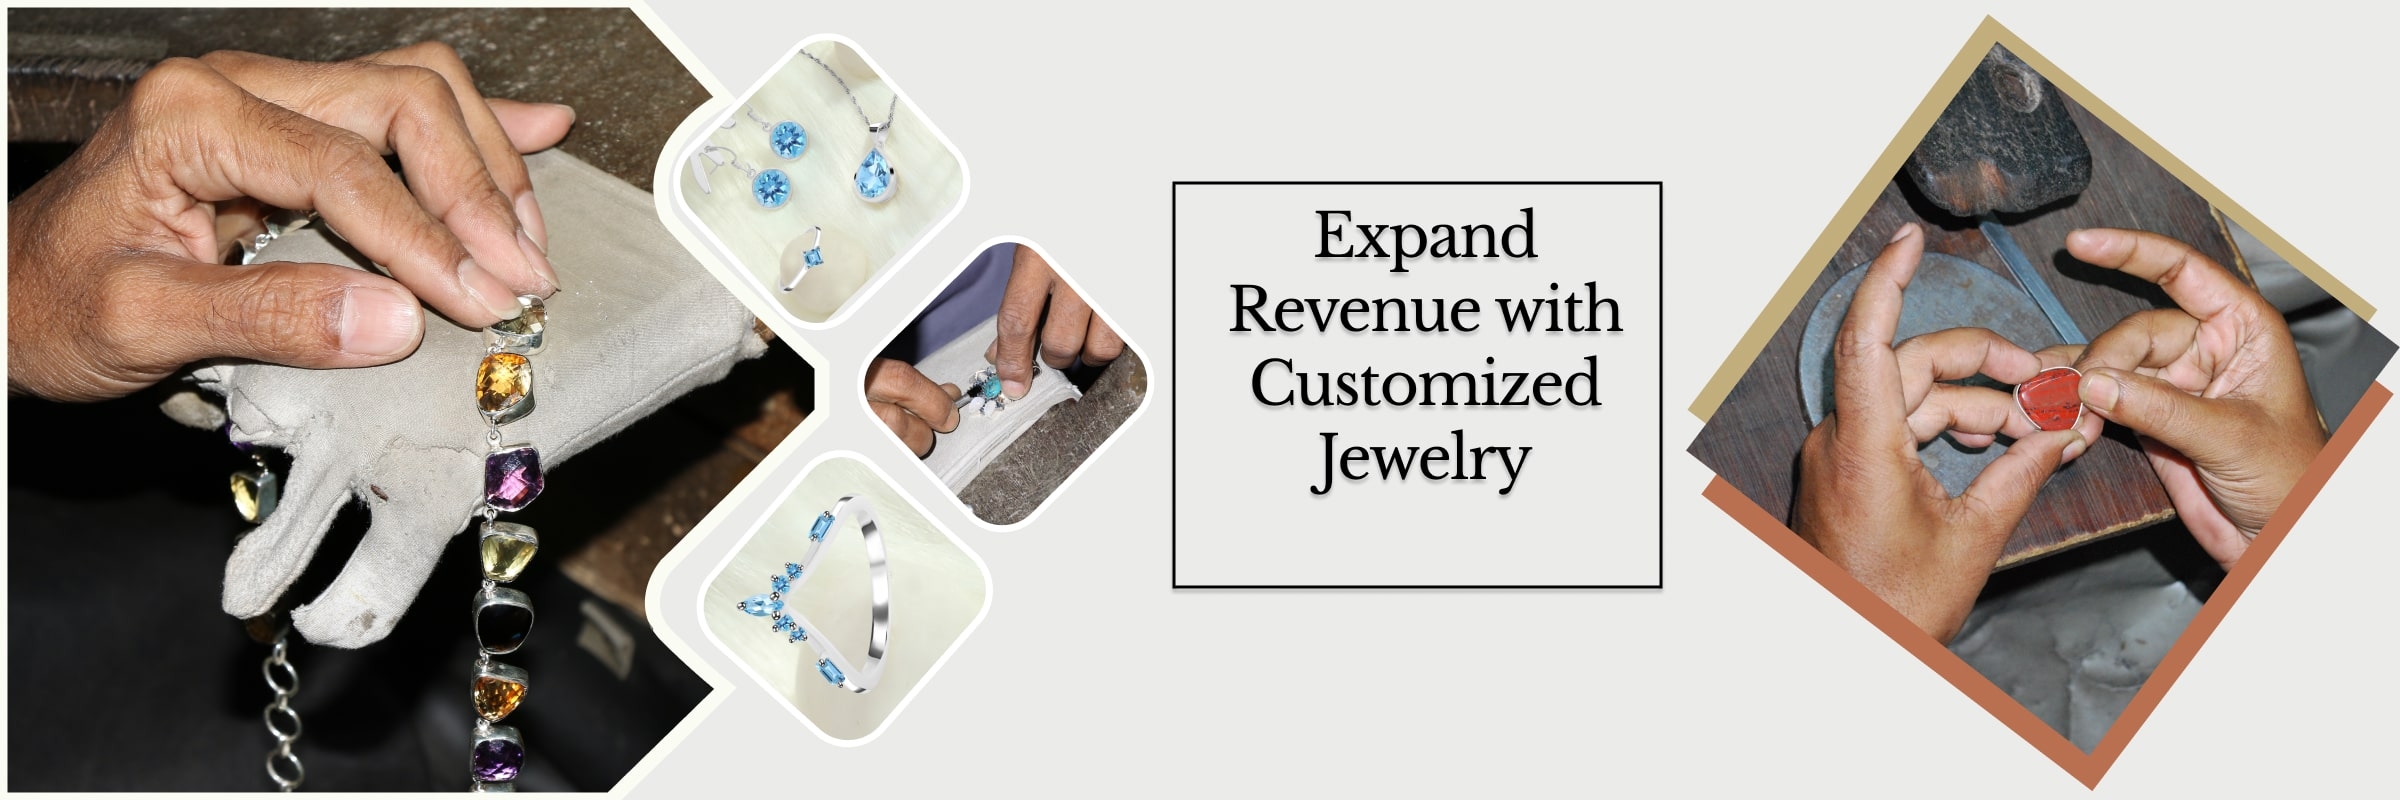 Reason 4: For Additional Revenue, You can offer Jewelry Customization